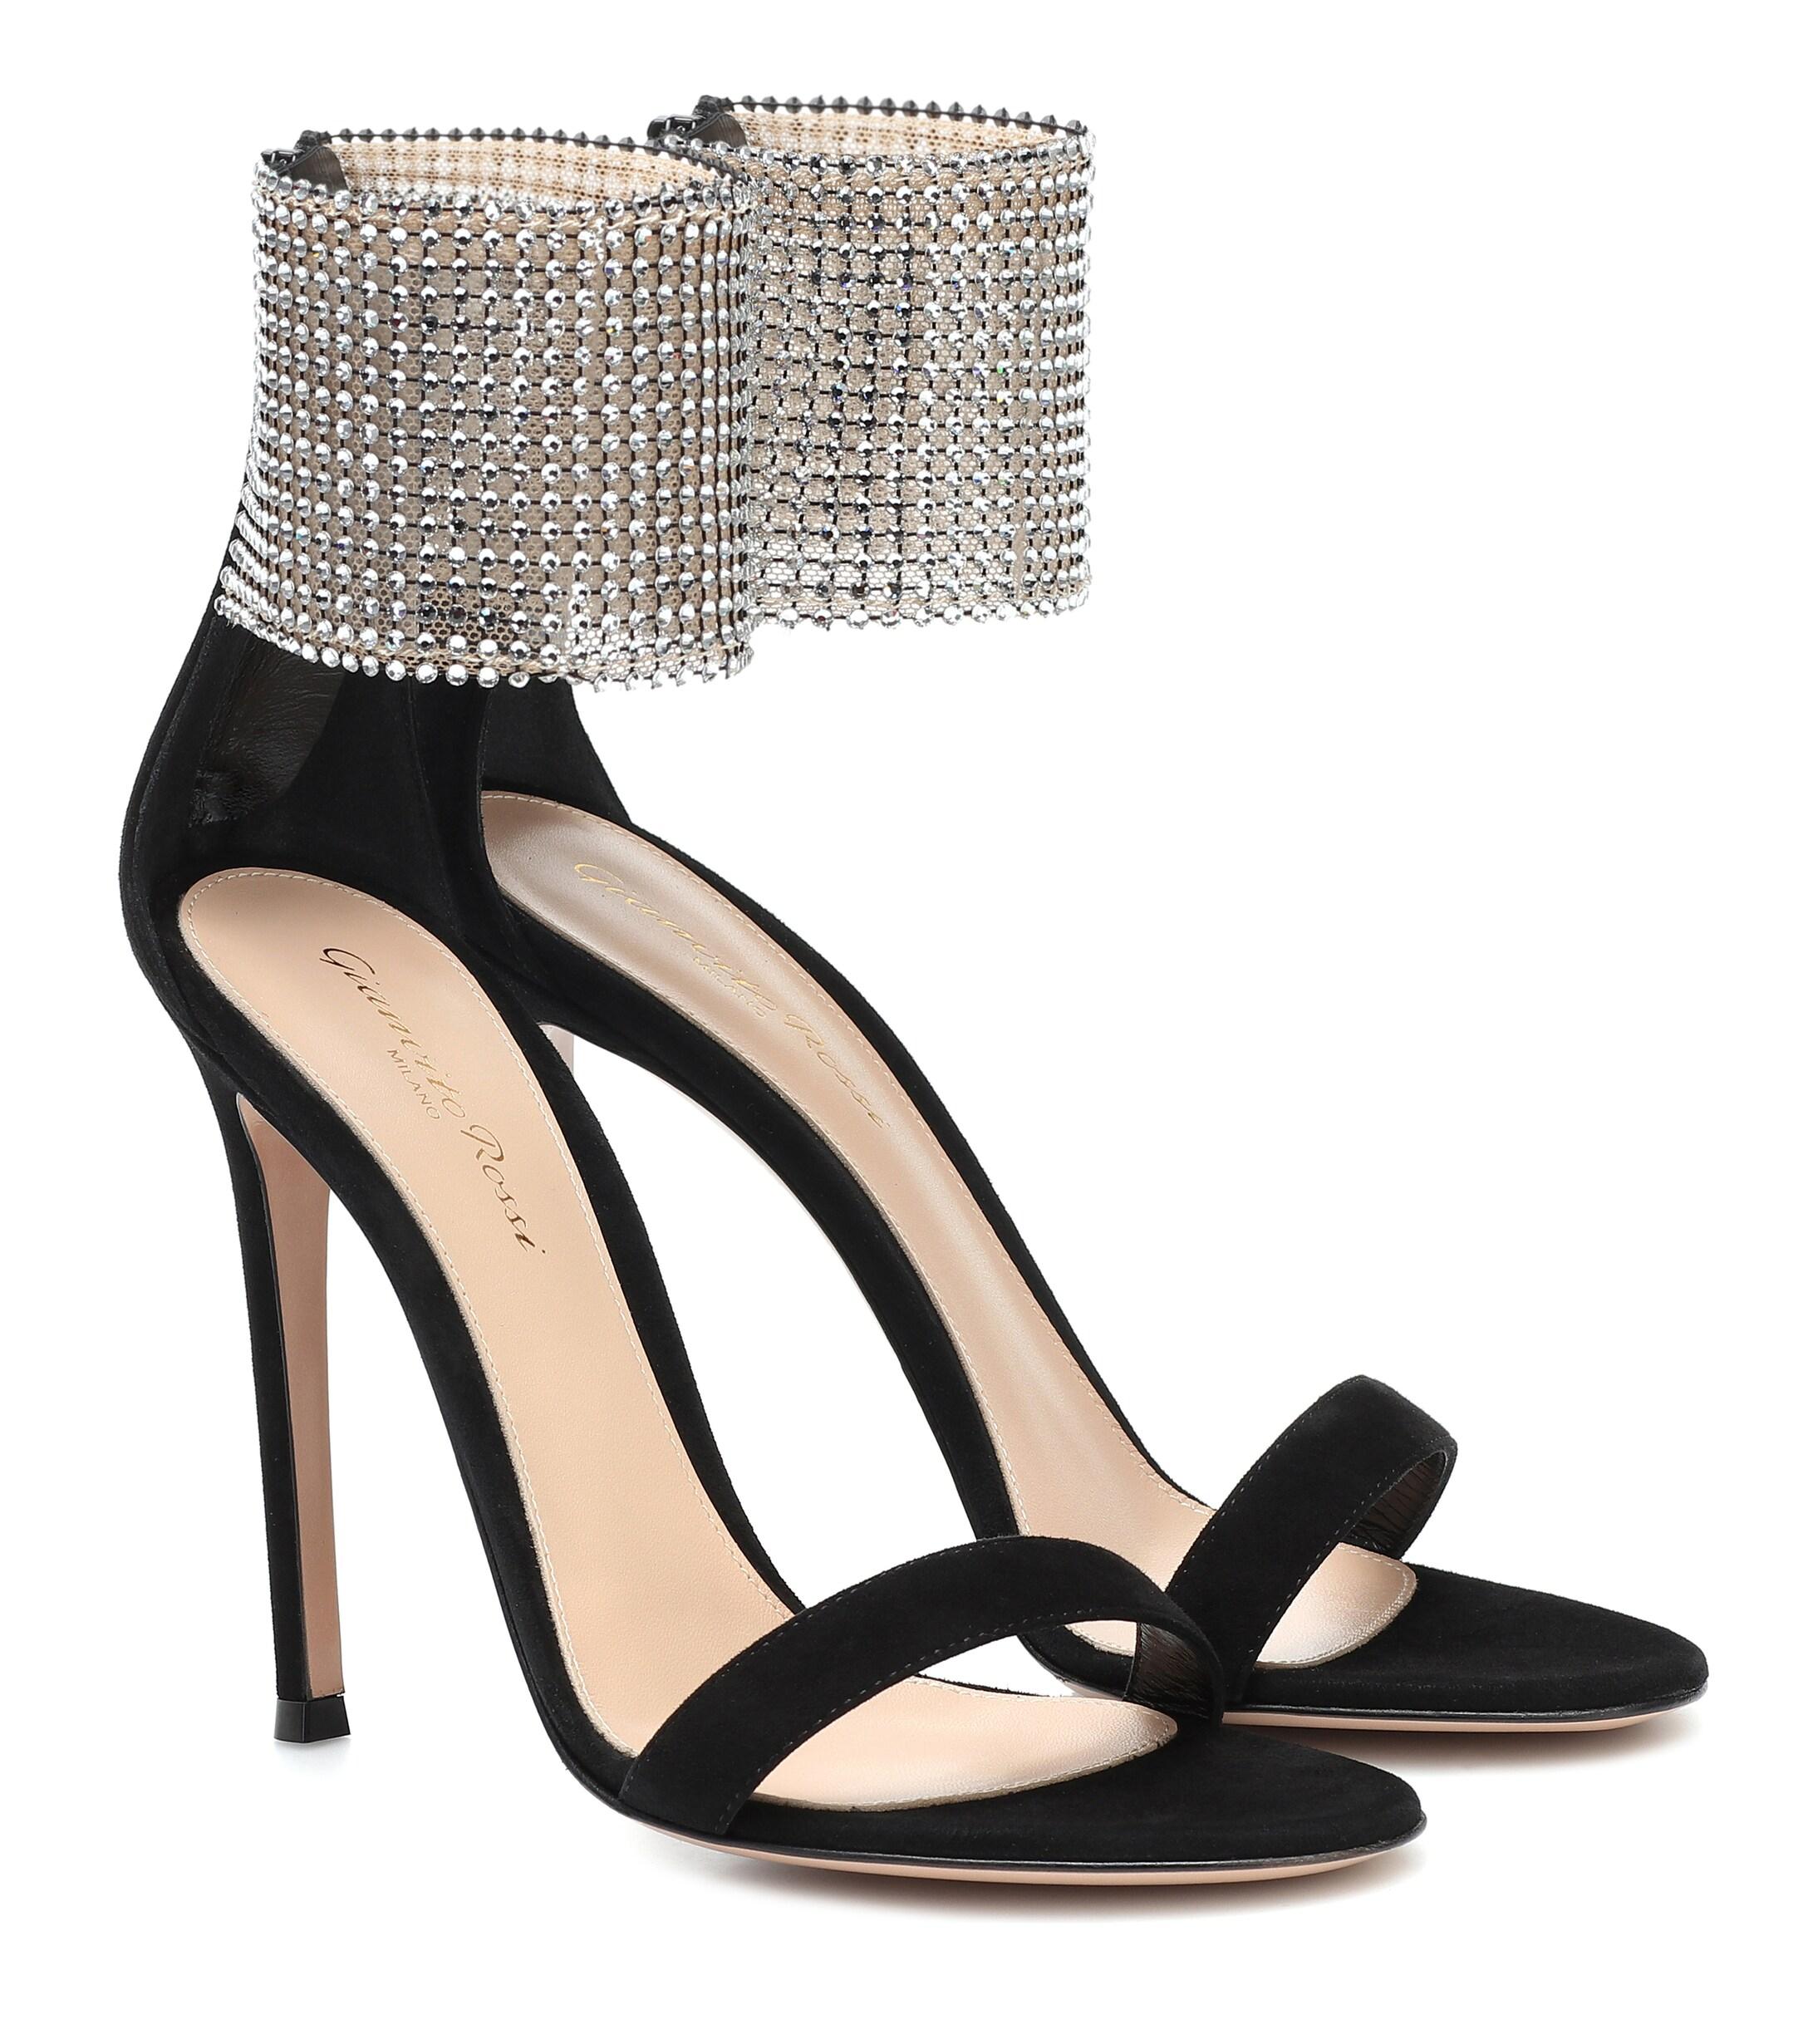 Gianvito Rossi Adore 110 Embellished Suede Sandals in Black | Lyst